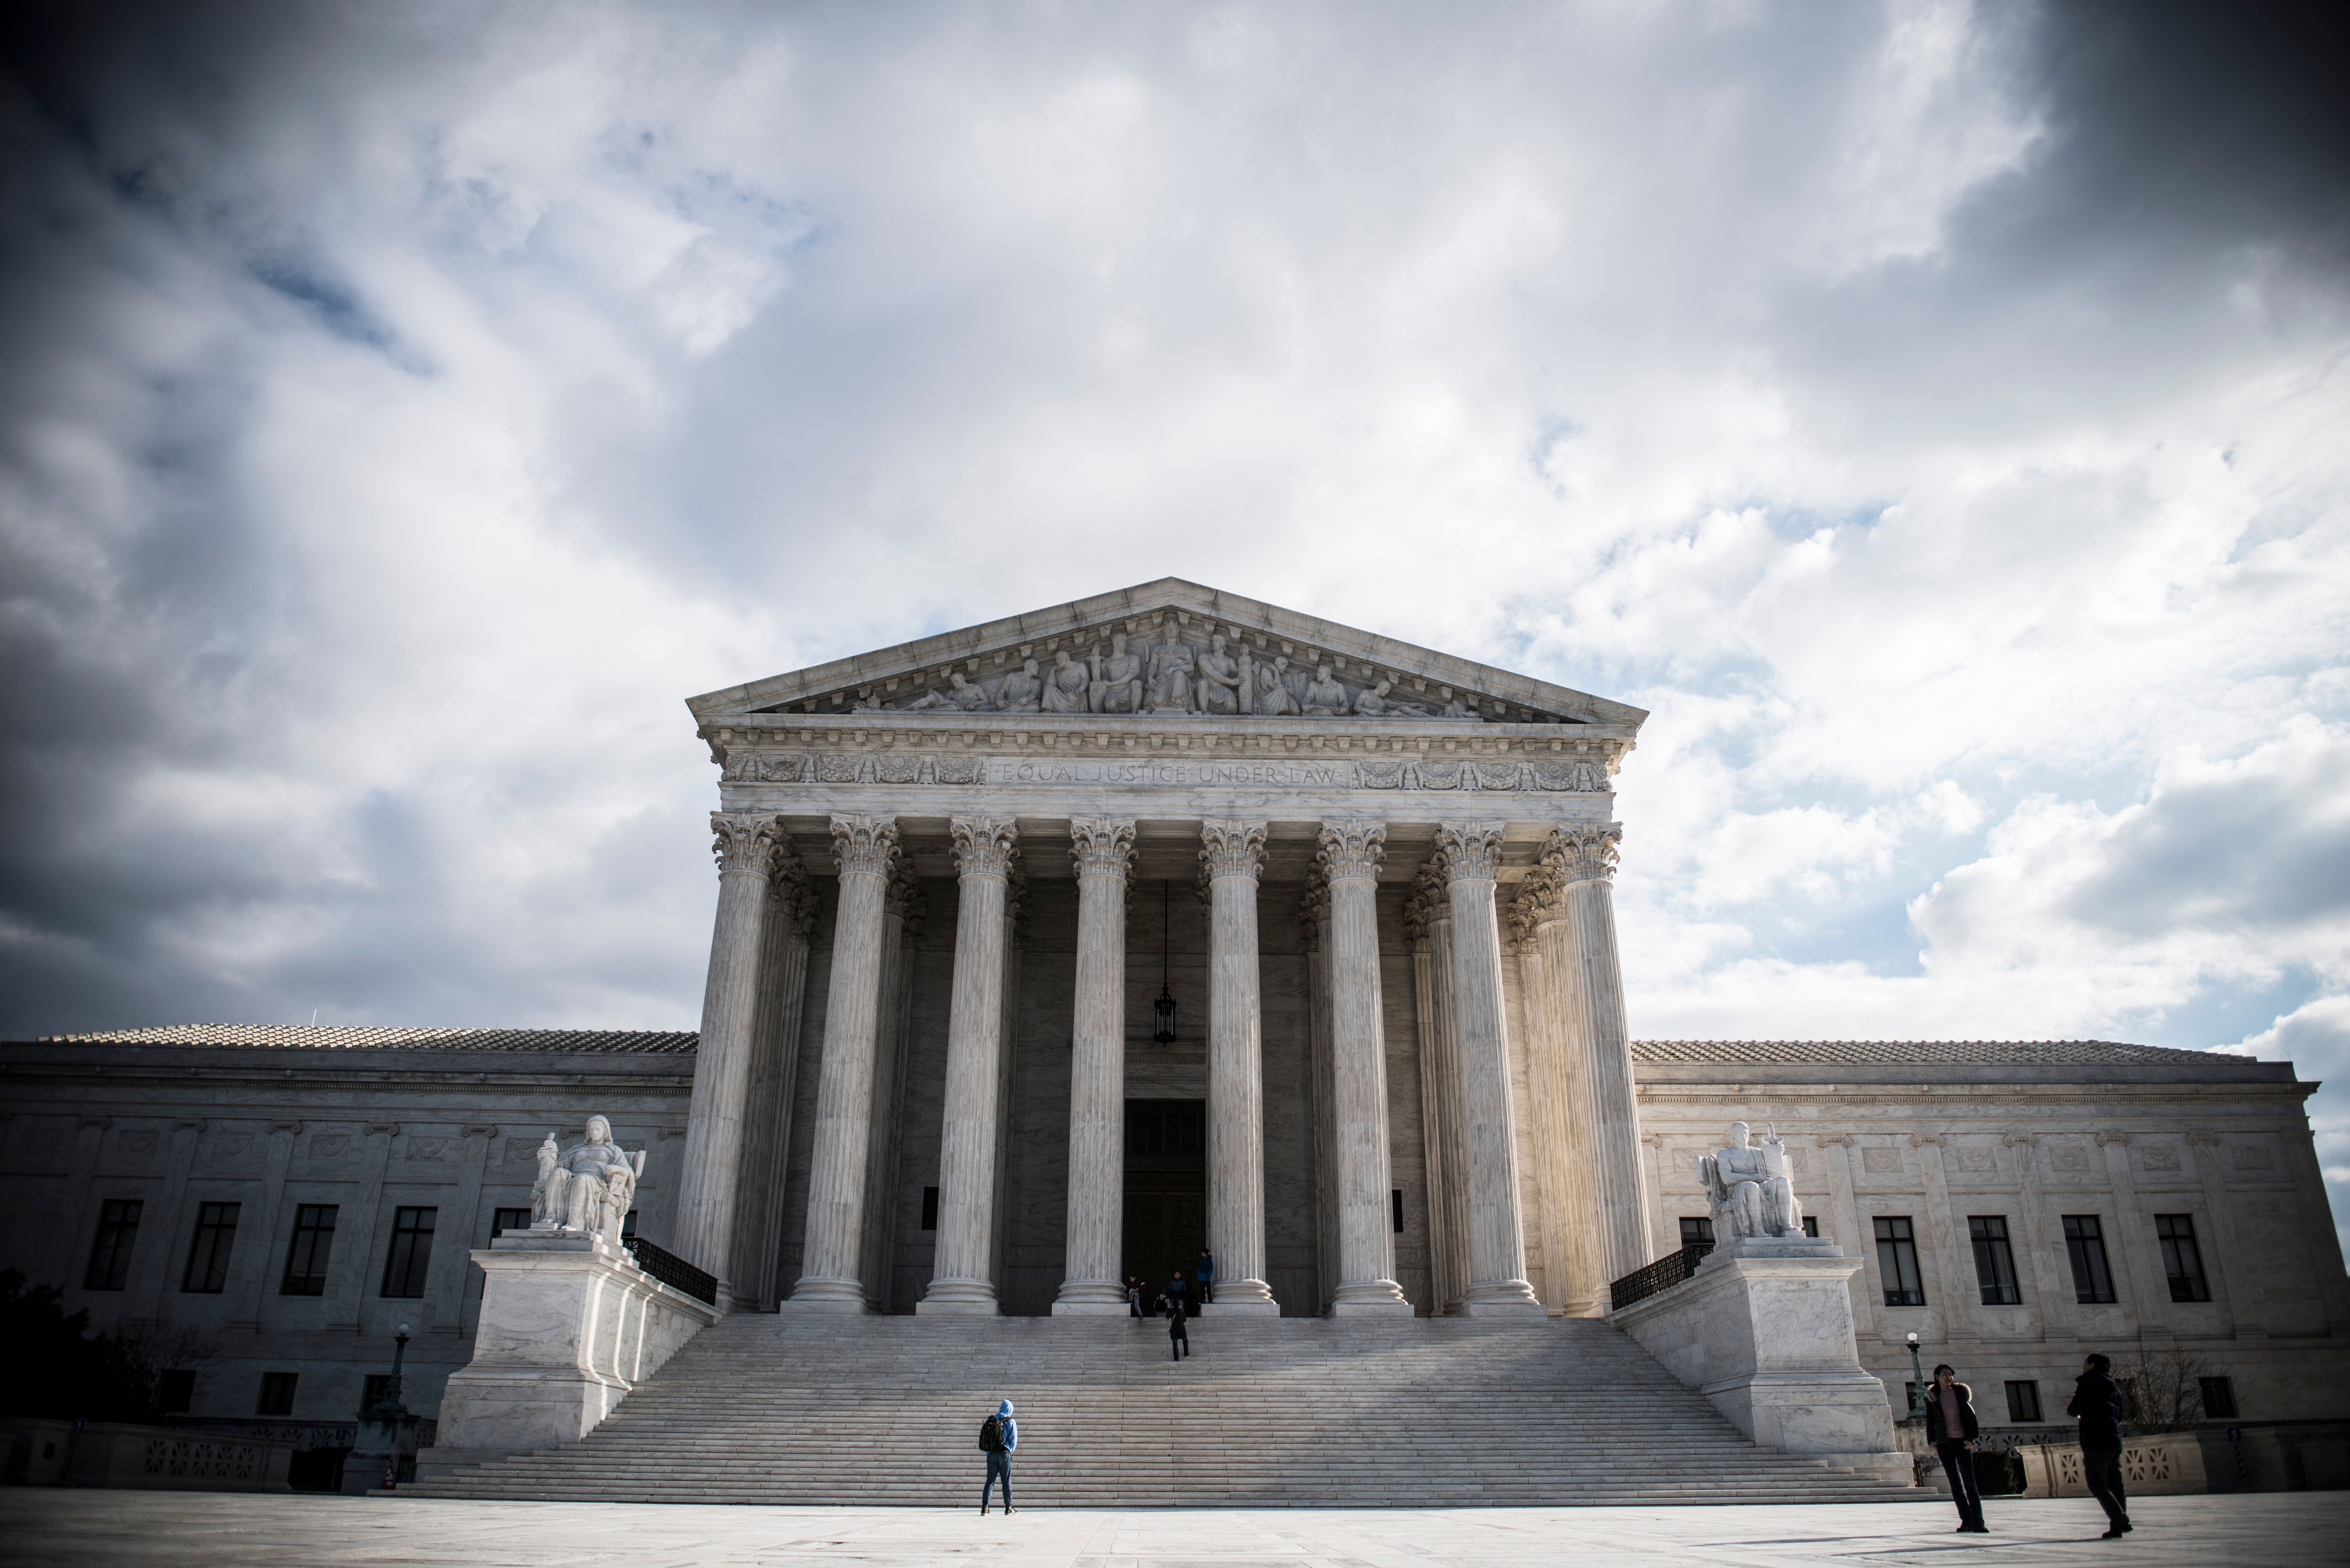 The Supreme Court as seen on Decmeber 24, 2018. (Eric Baradat/AFP/Getty Images)